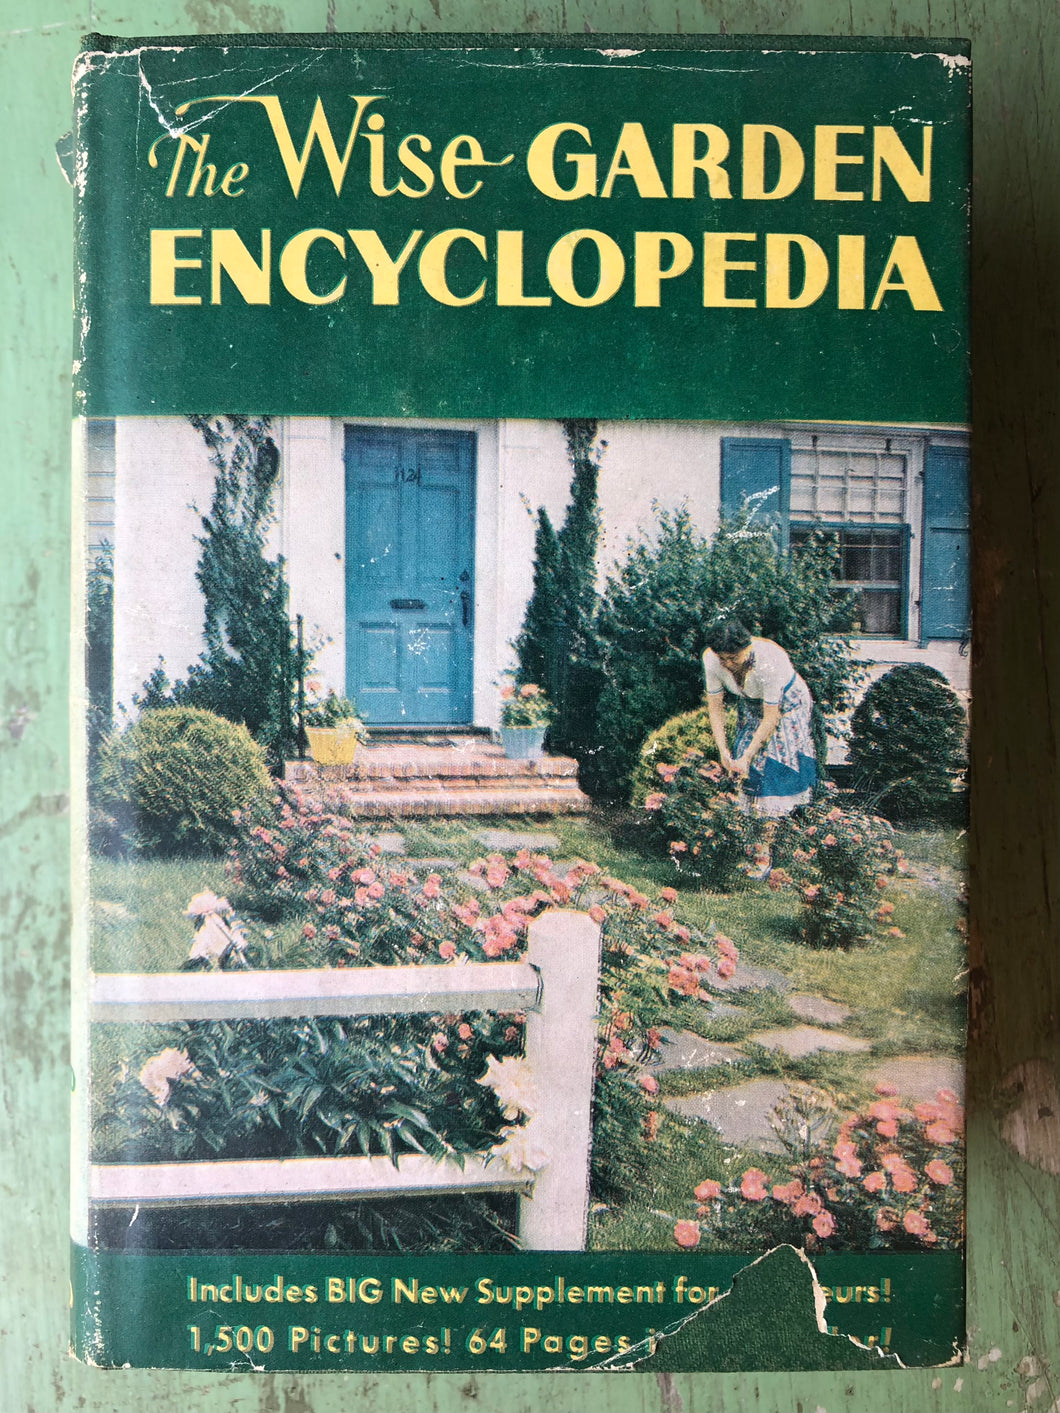 The Wise Garden Encyclopedia: A Complete Practical and Convenient Guide to Every Detail of Gardening. Edited by E. L. D. Seymour